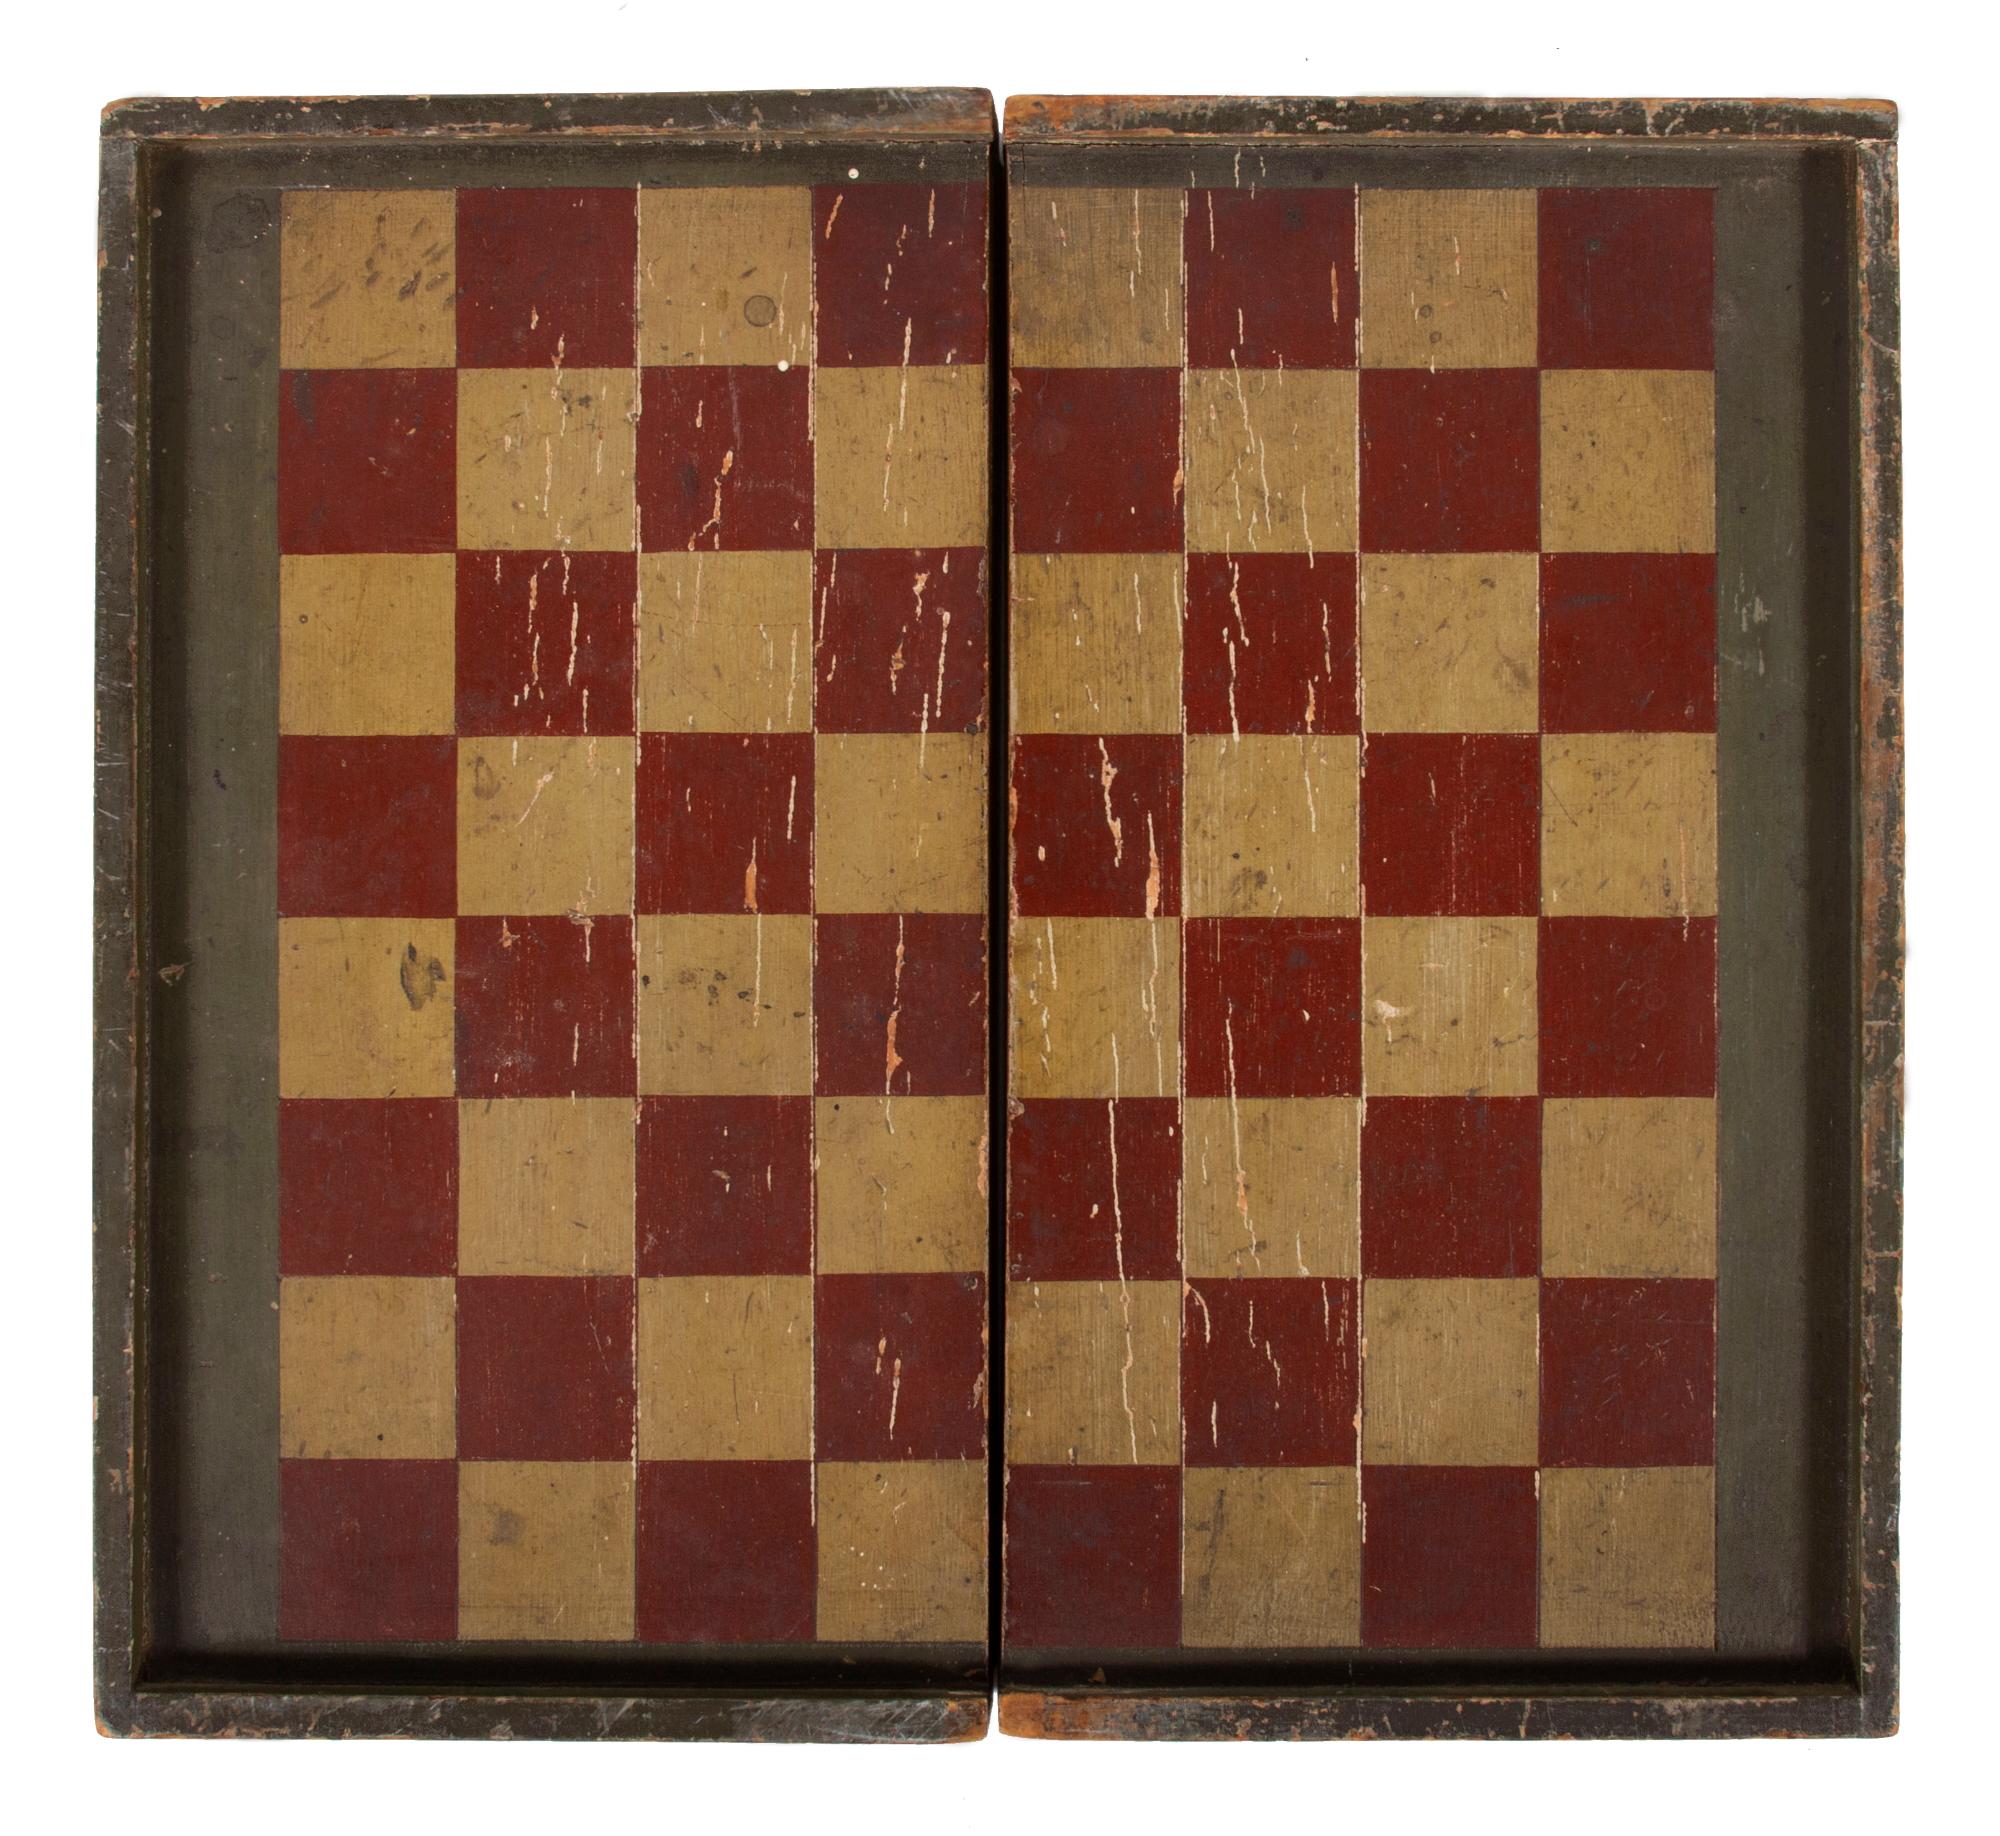 Red, black, and ochre white-painted, folding backgammon game board with leaf-like medallions, circa 1870-1890

American Backgammon and checker board, made of softwood, with a case that is hand-dovetailed at one end and nailed at the other